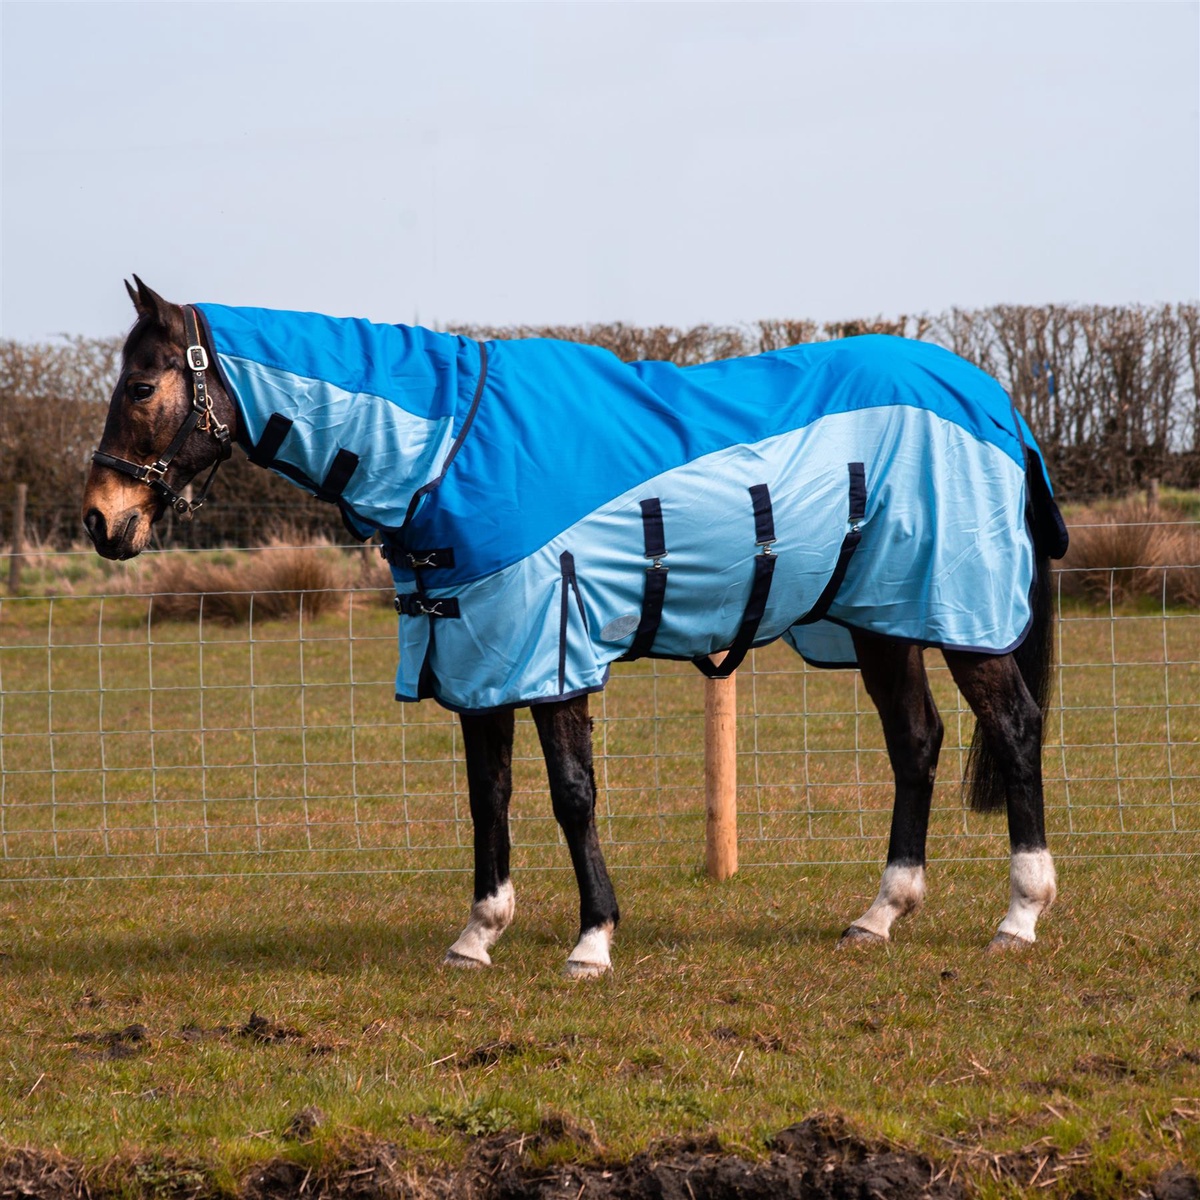 How Important is Turnout Rug Denier (Fabric Strength) for a Lightweight Option?